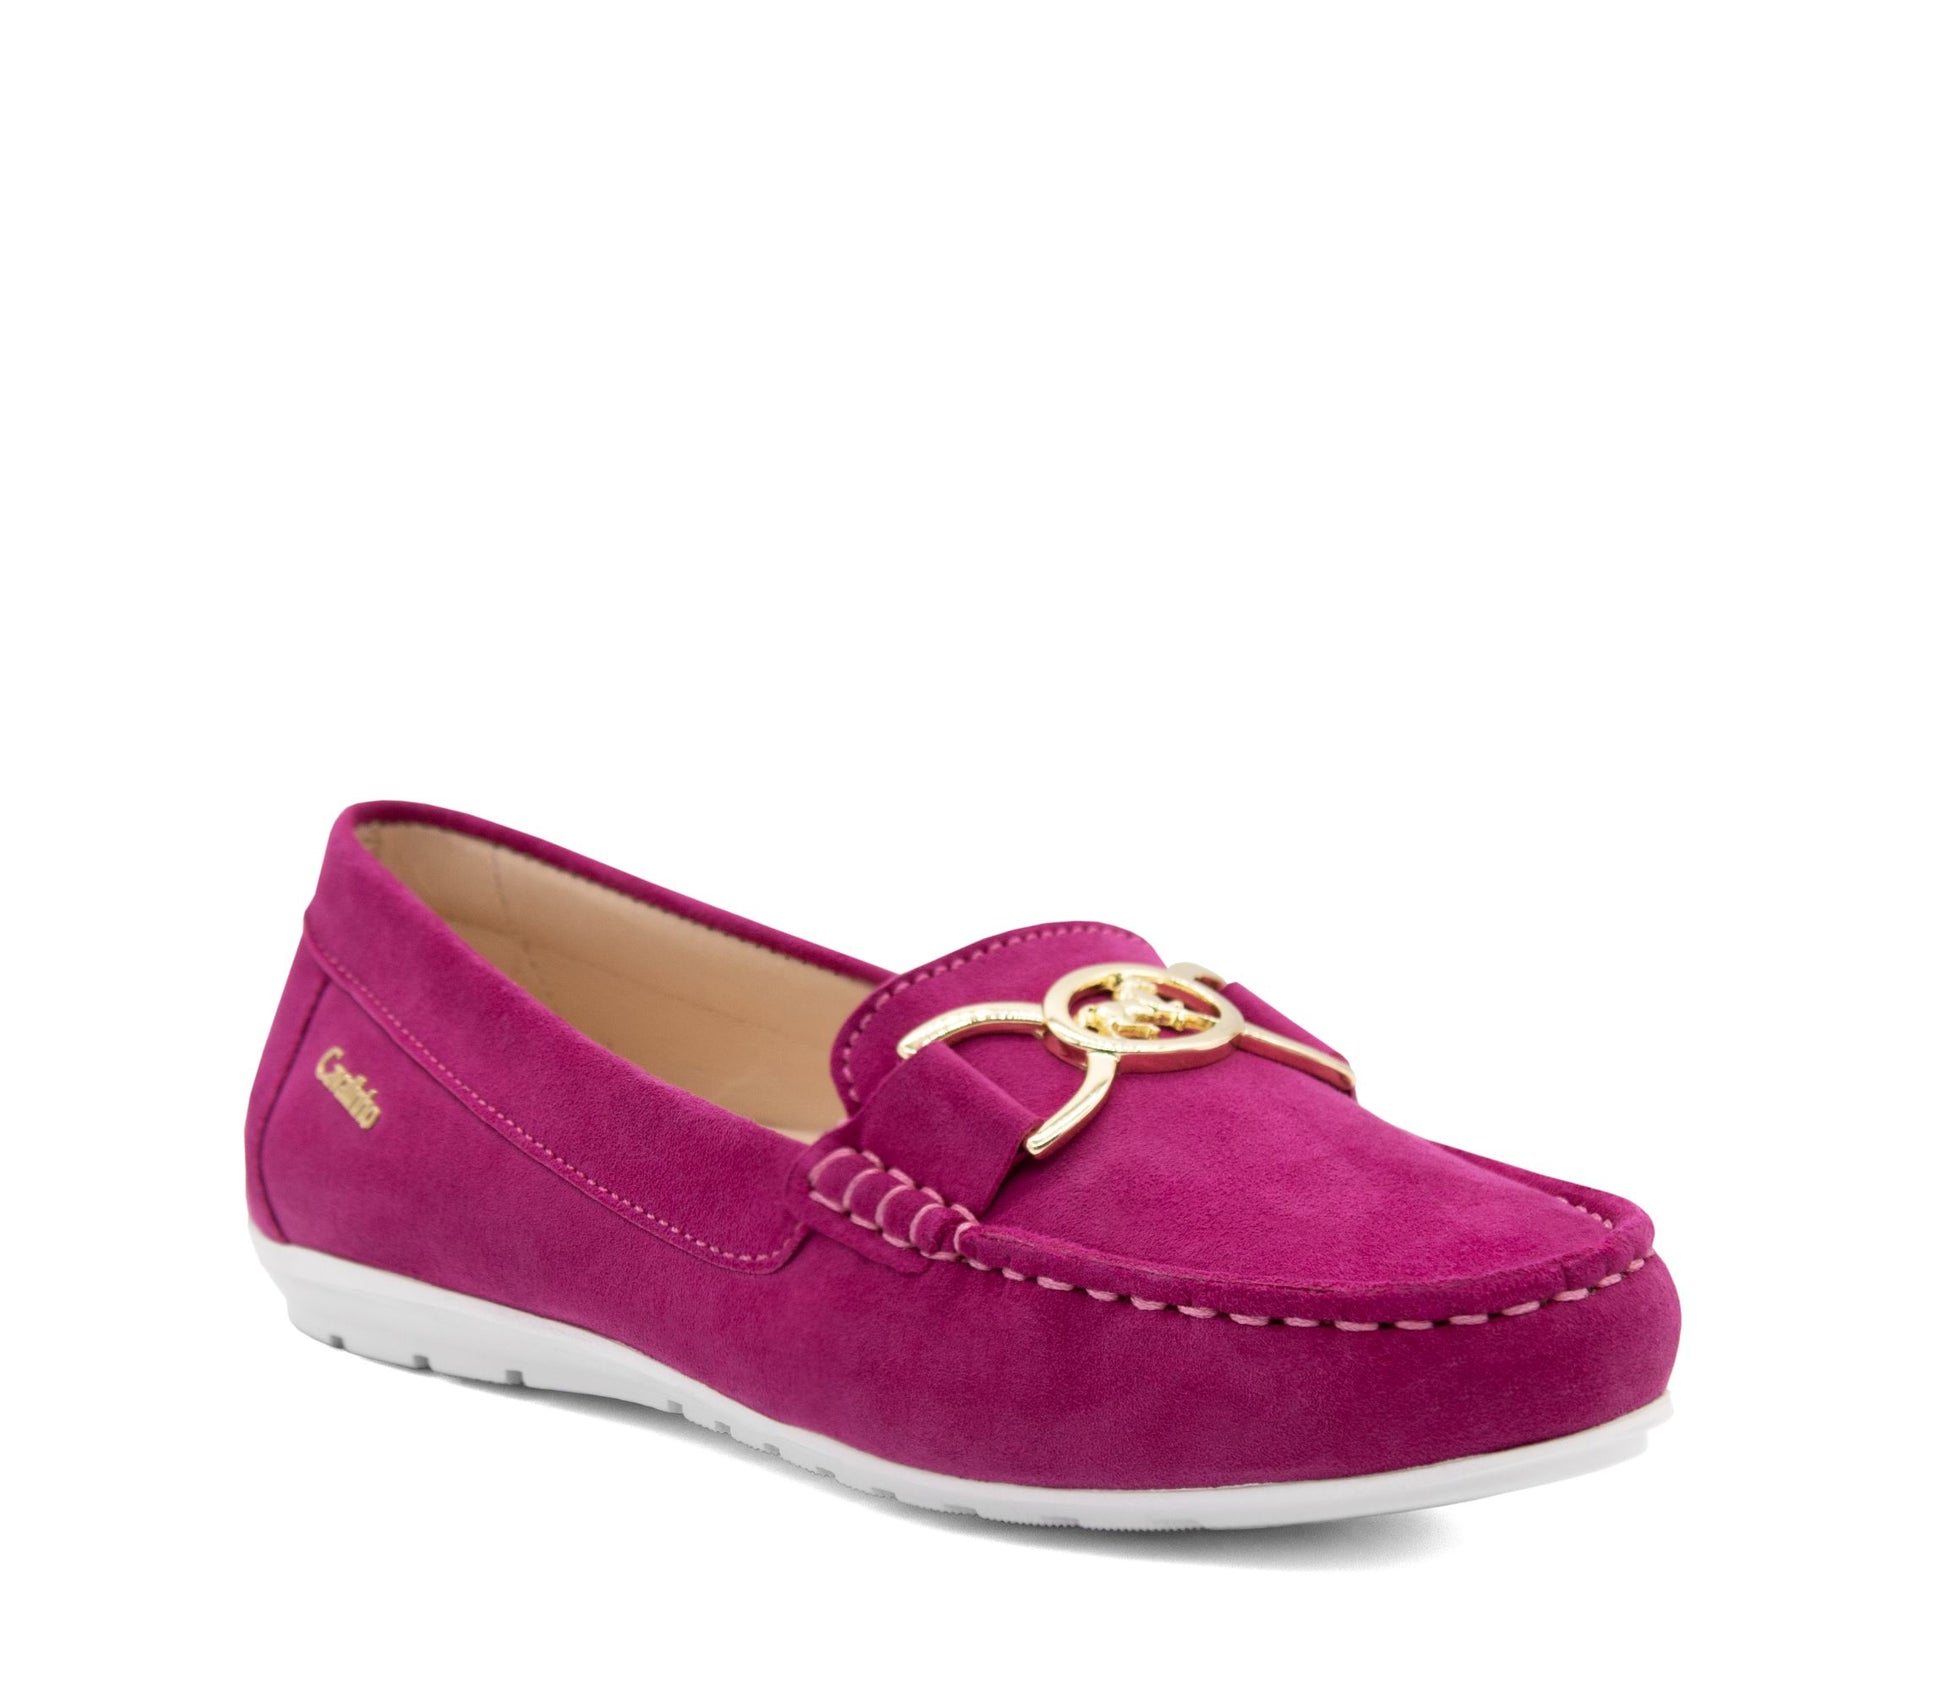 Cavalinho Belle Leather Loafers - Pink - 48020001.18_2